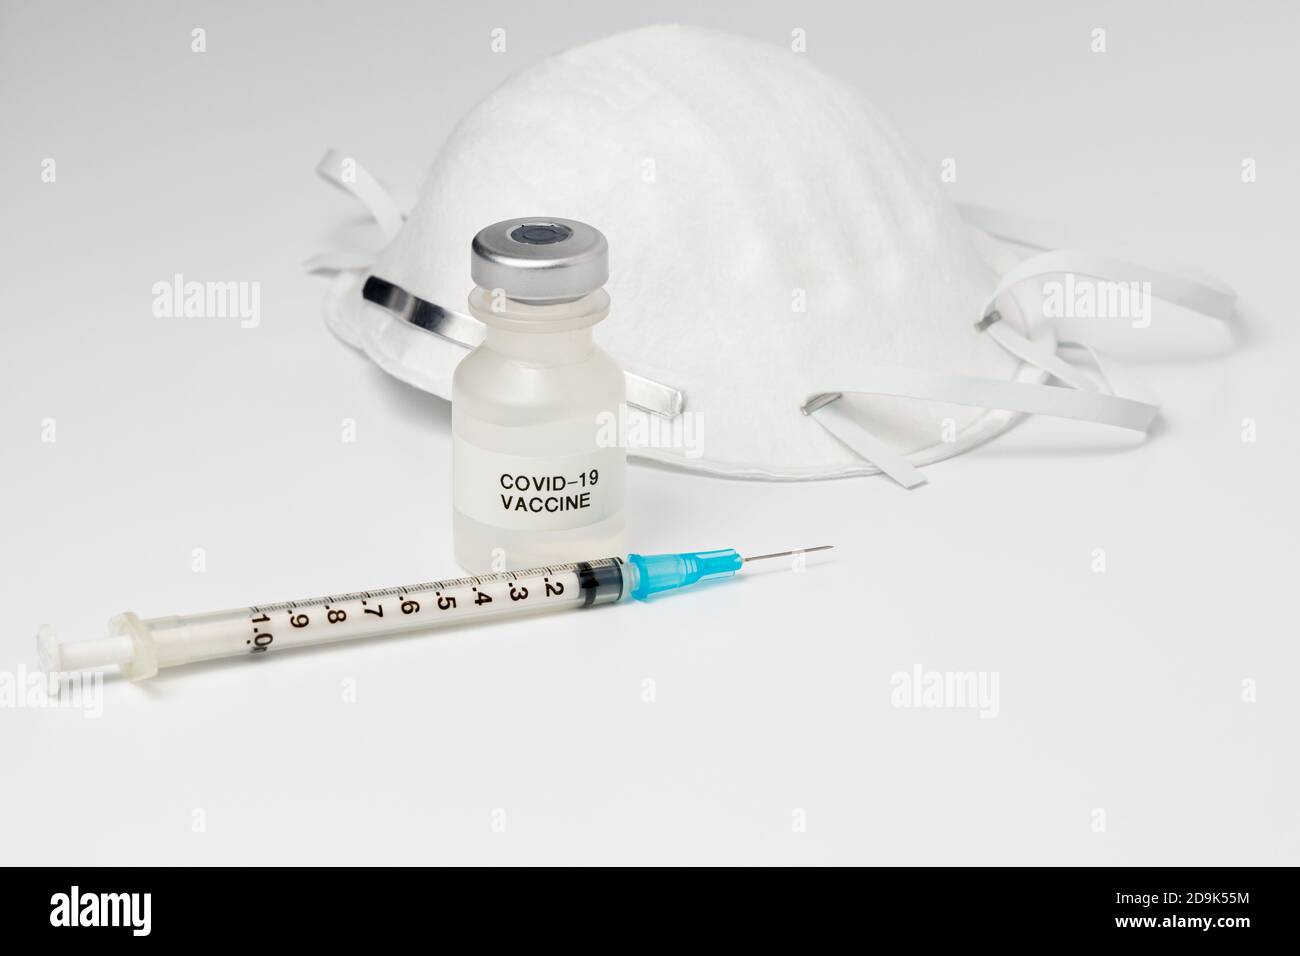 vial with Covid-19 vaccine, syringe and needle, and N95 face mask isolated on white background. Concept of coronavirus pandemic, immunization Stock Photo